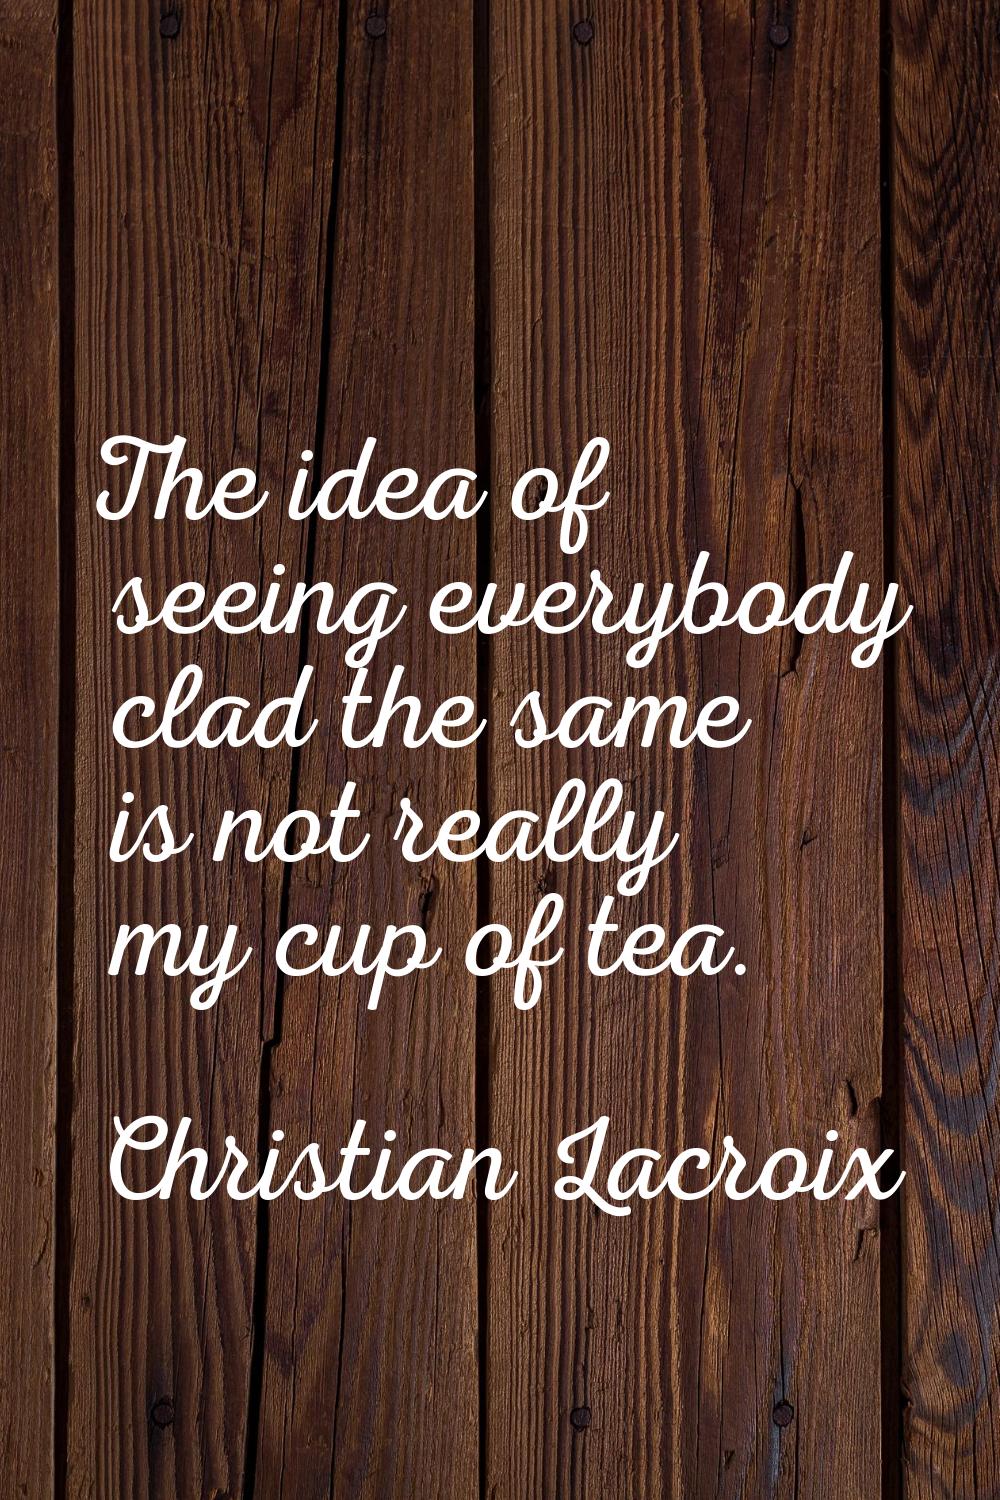 The idea of seeing everybody clad the same is not really my cup of tea.